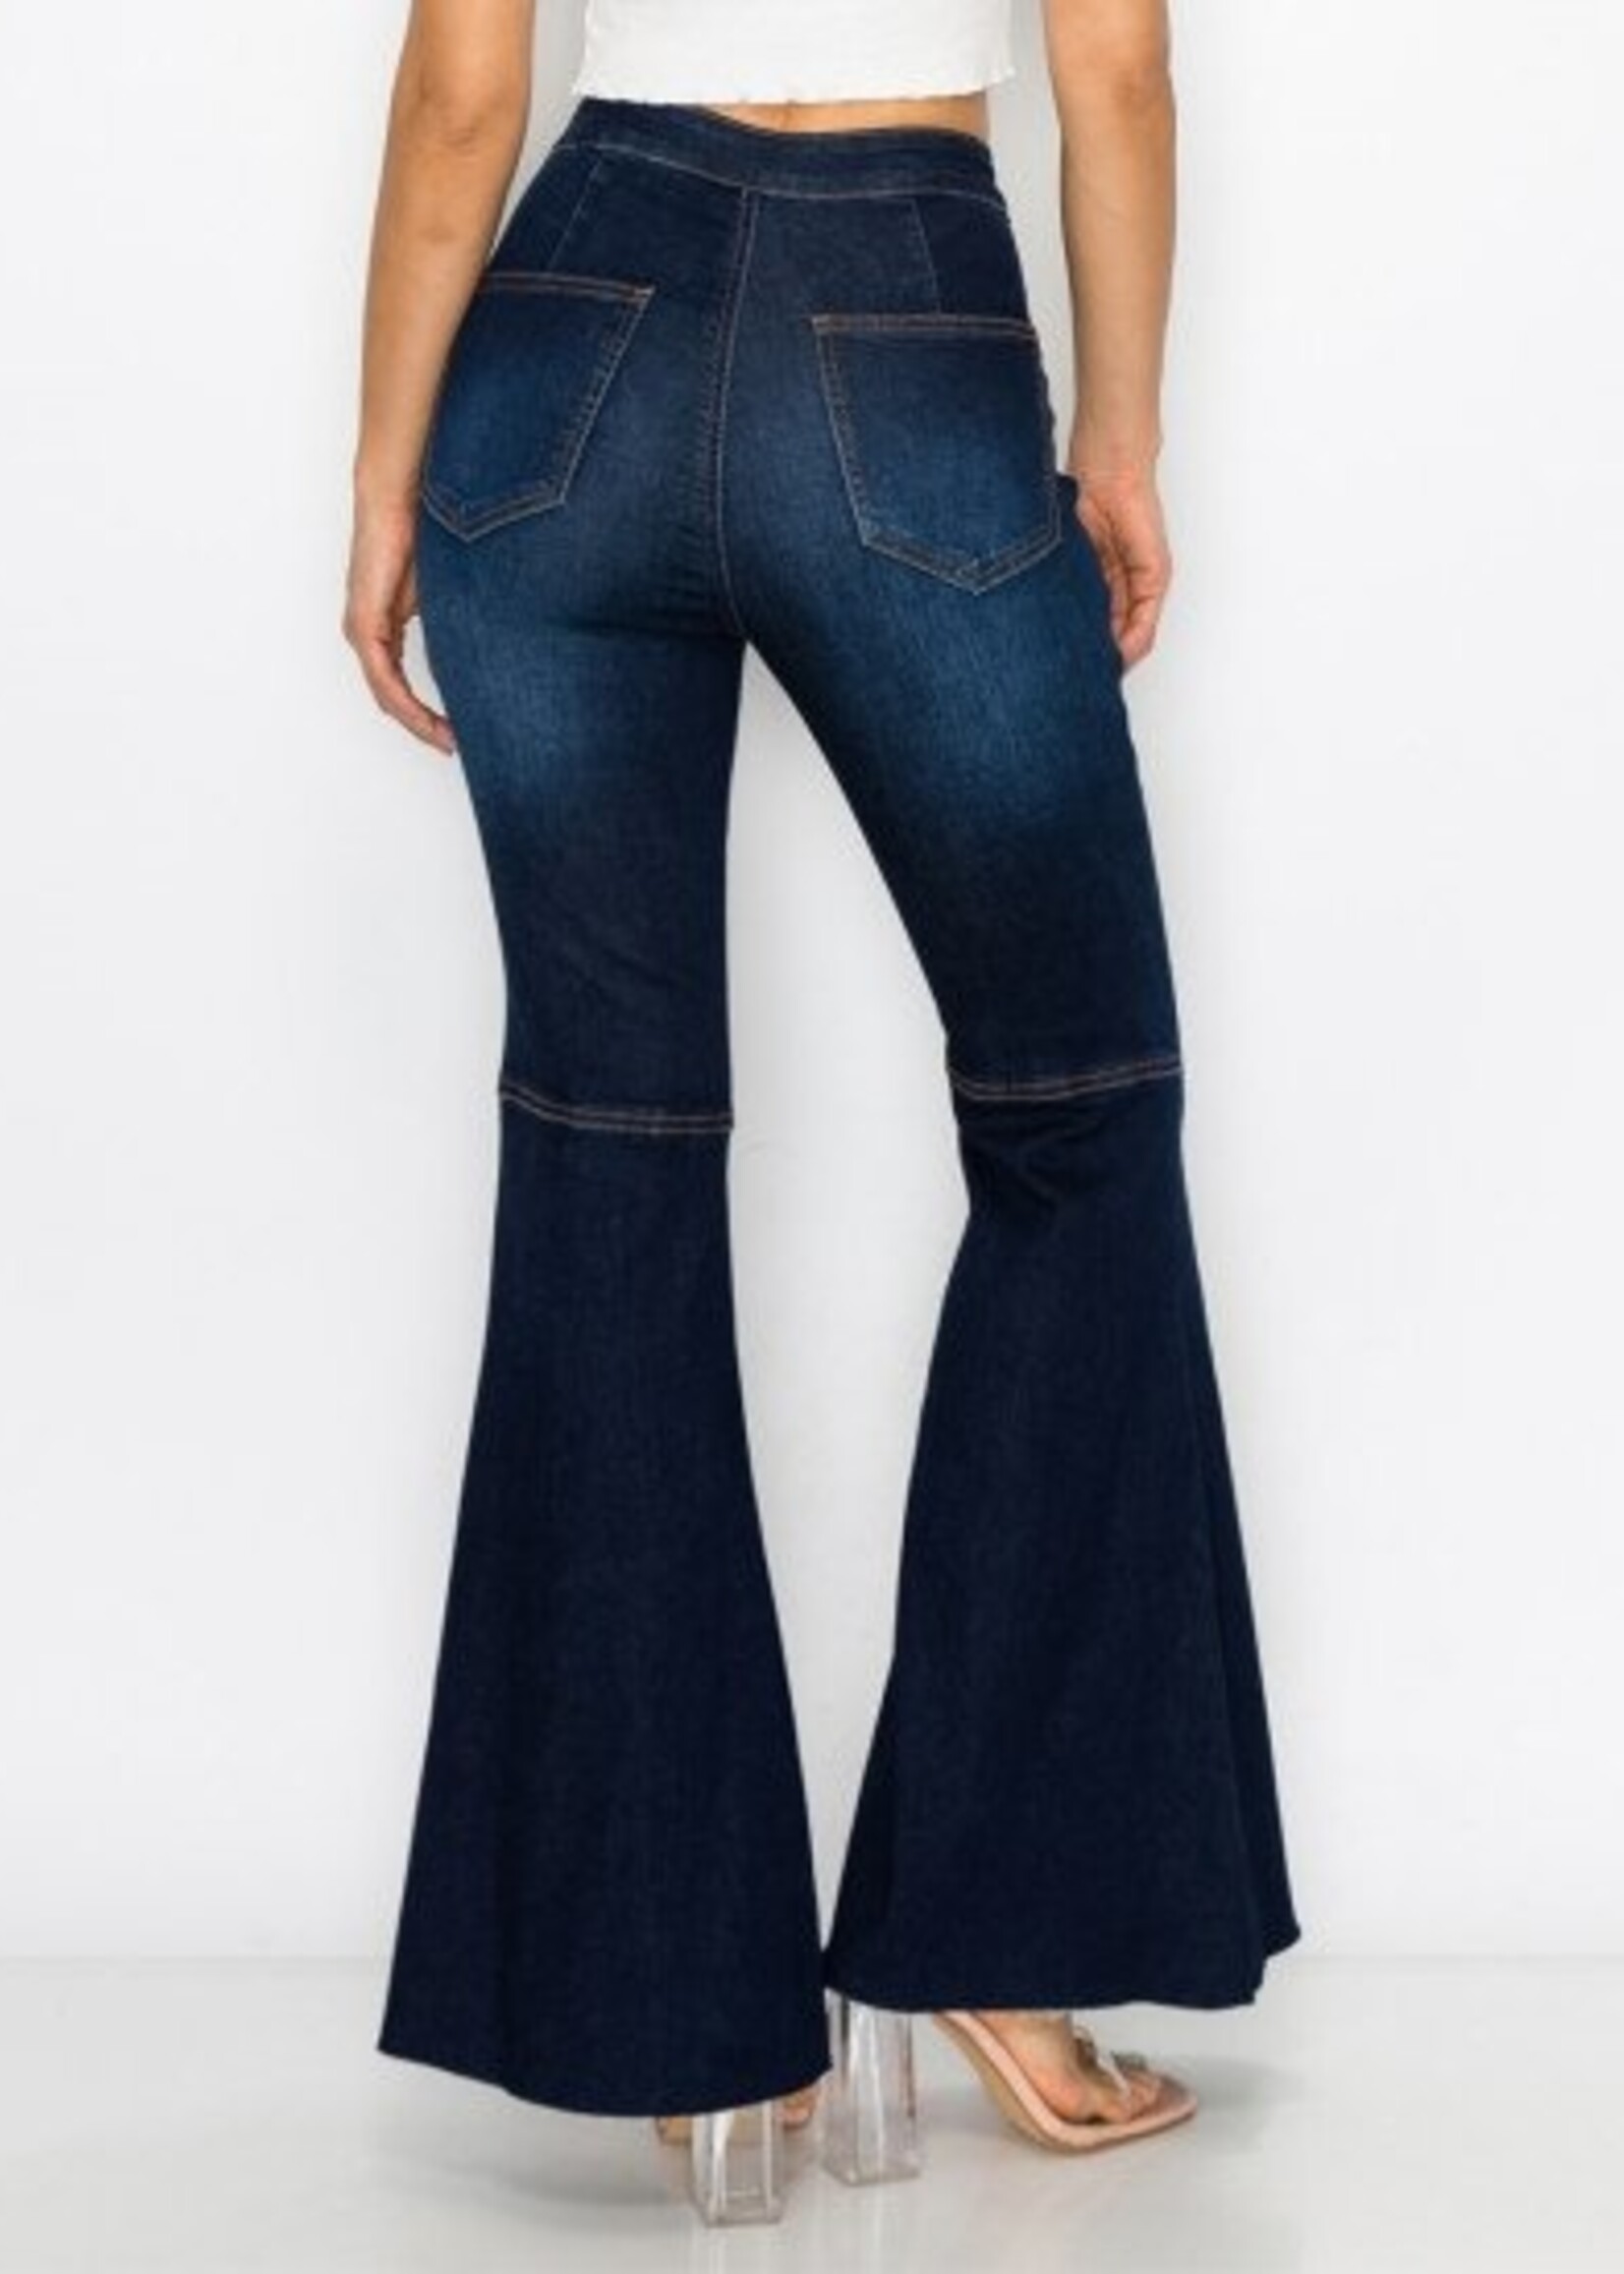 THE ESSENTIAL EDIT WAX COATED JEANS – STYLE ON THE GO